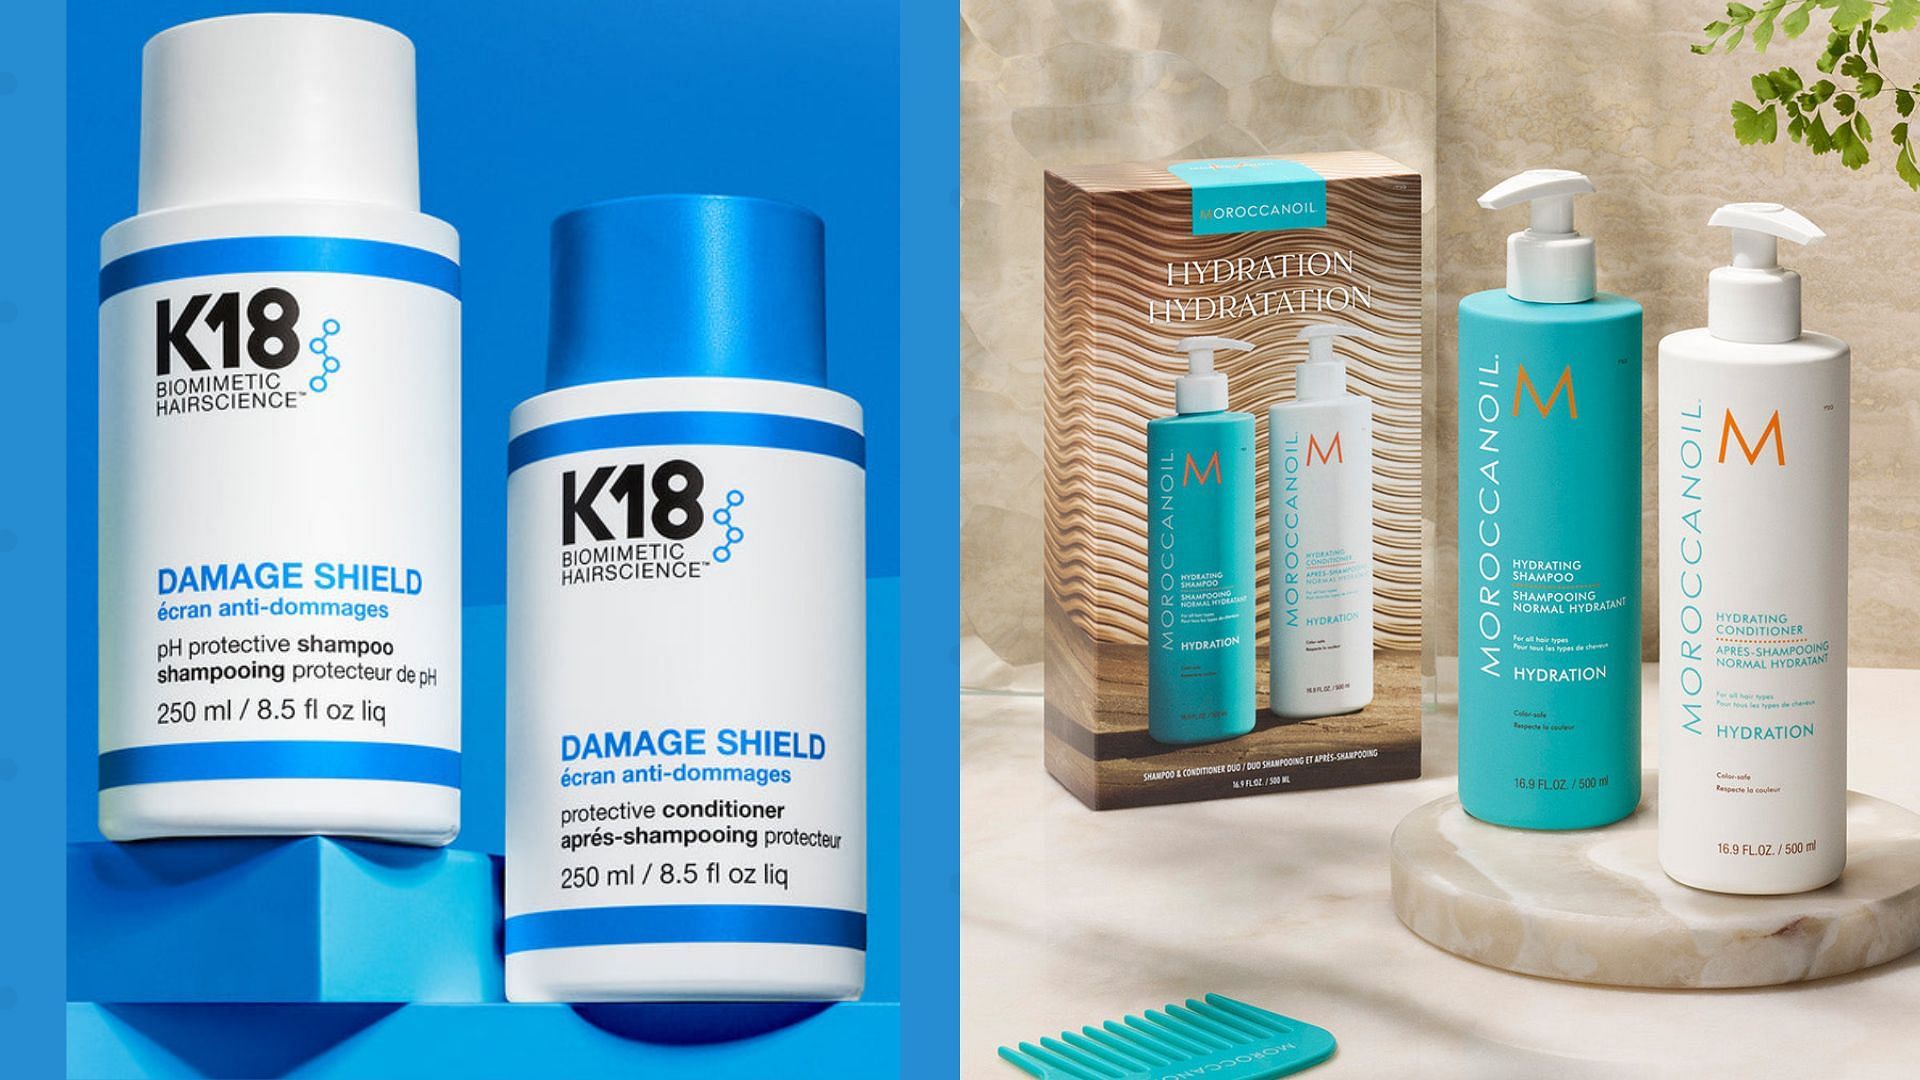 Shampoo and conditioner for color-treated hair (Image via K18 Hair, Moroccanoil)